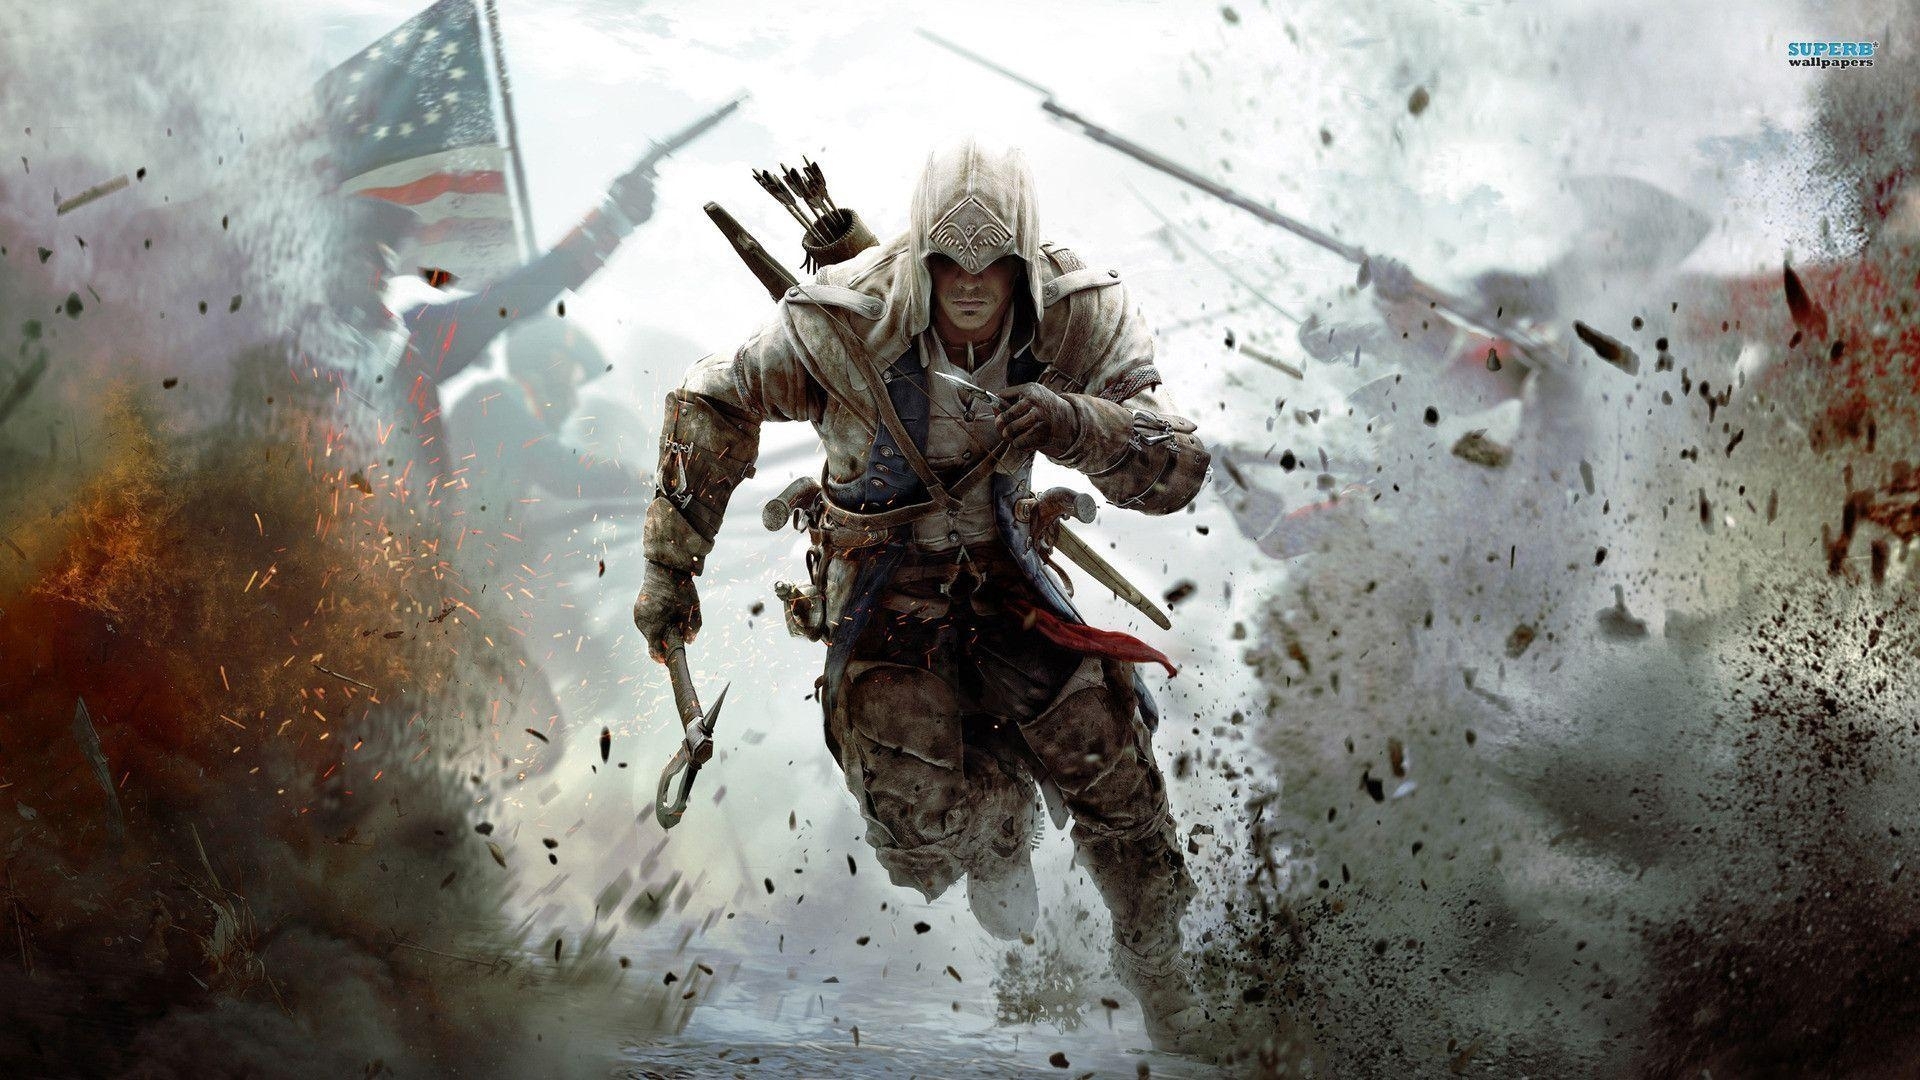 10 Latest Assassin's Creed 3 Hd Wallpapers FULL HD 1920×1080 For PC Background